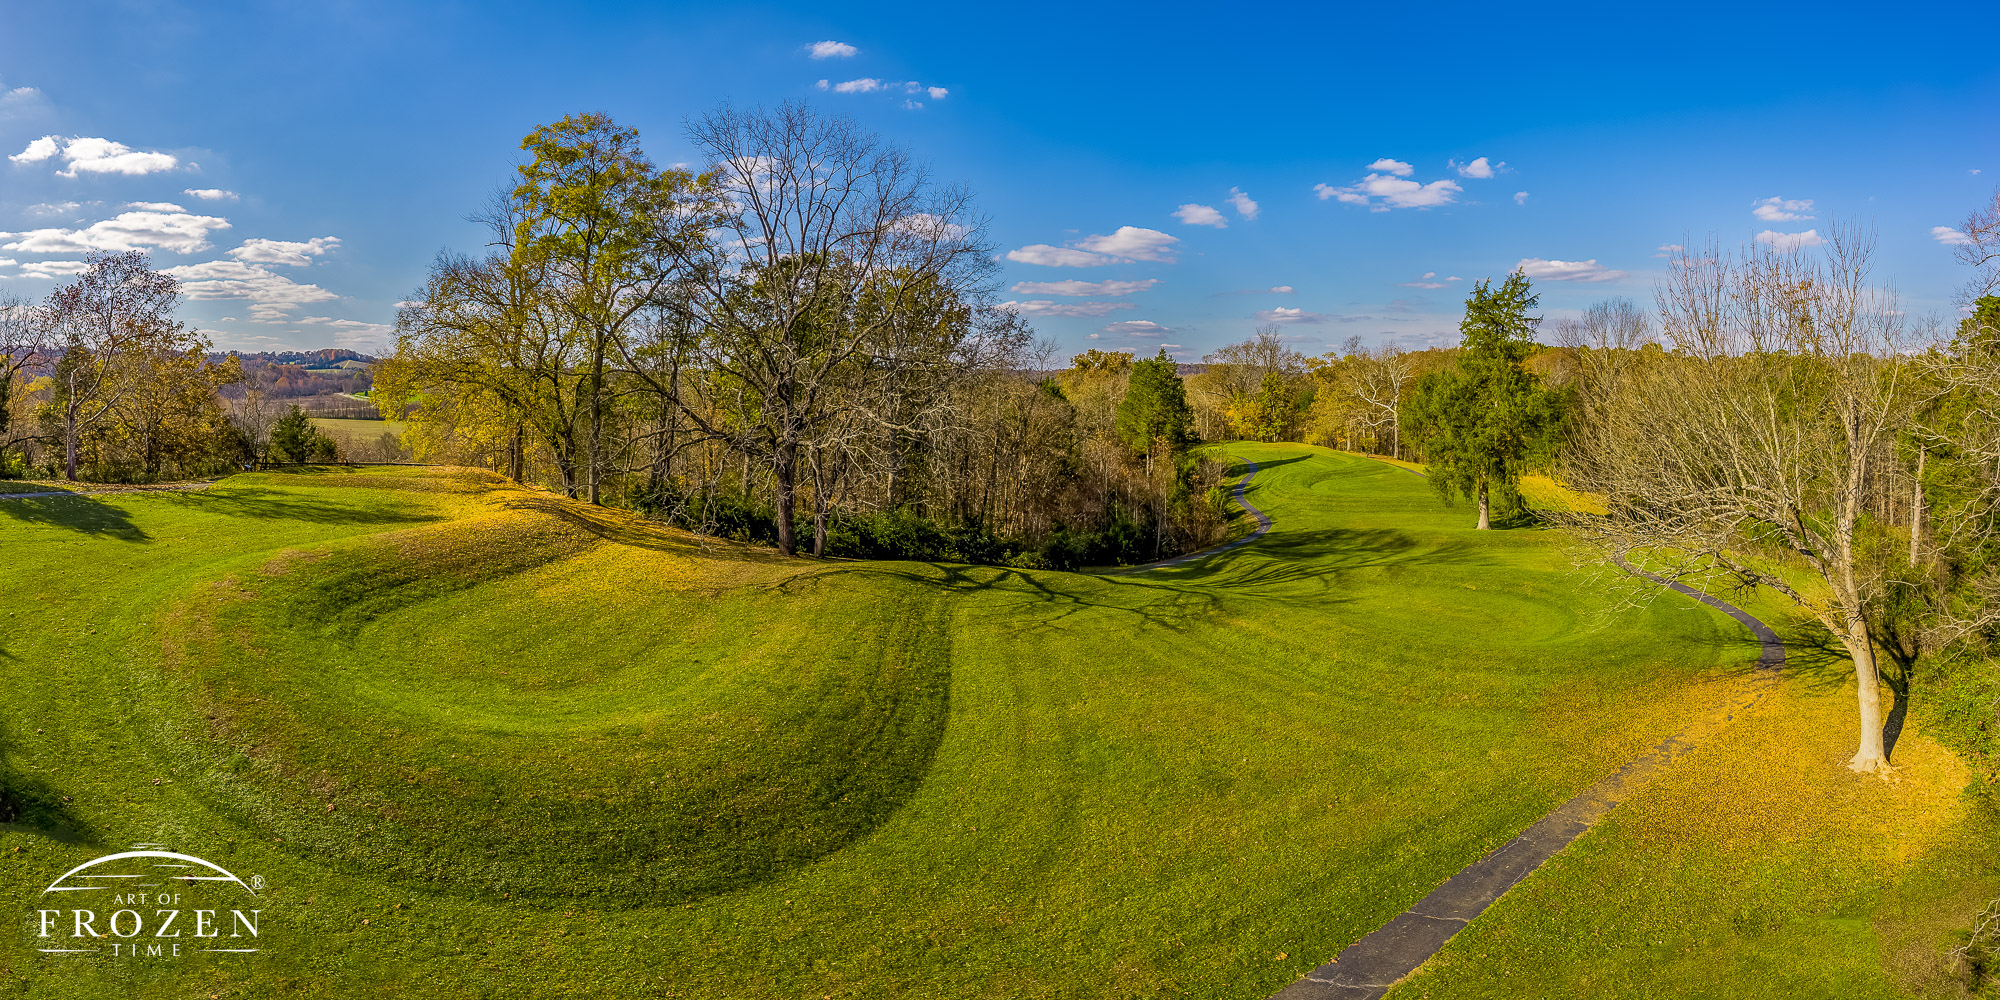 Ohio’s famous Serpent Mound from an elevated vantage point as autumn leaves selectively color the terrain features under blue skies.